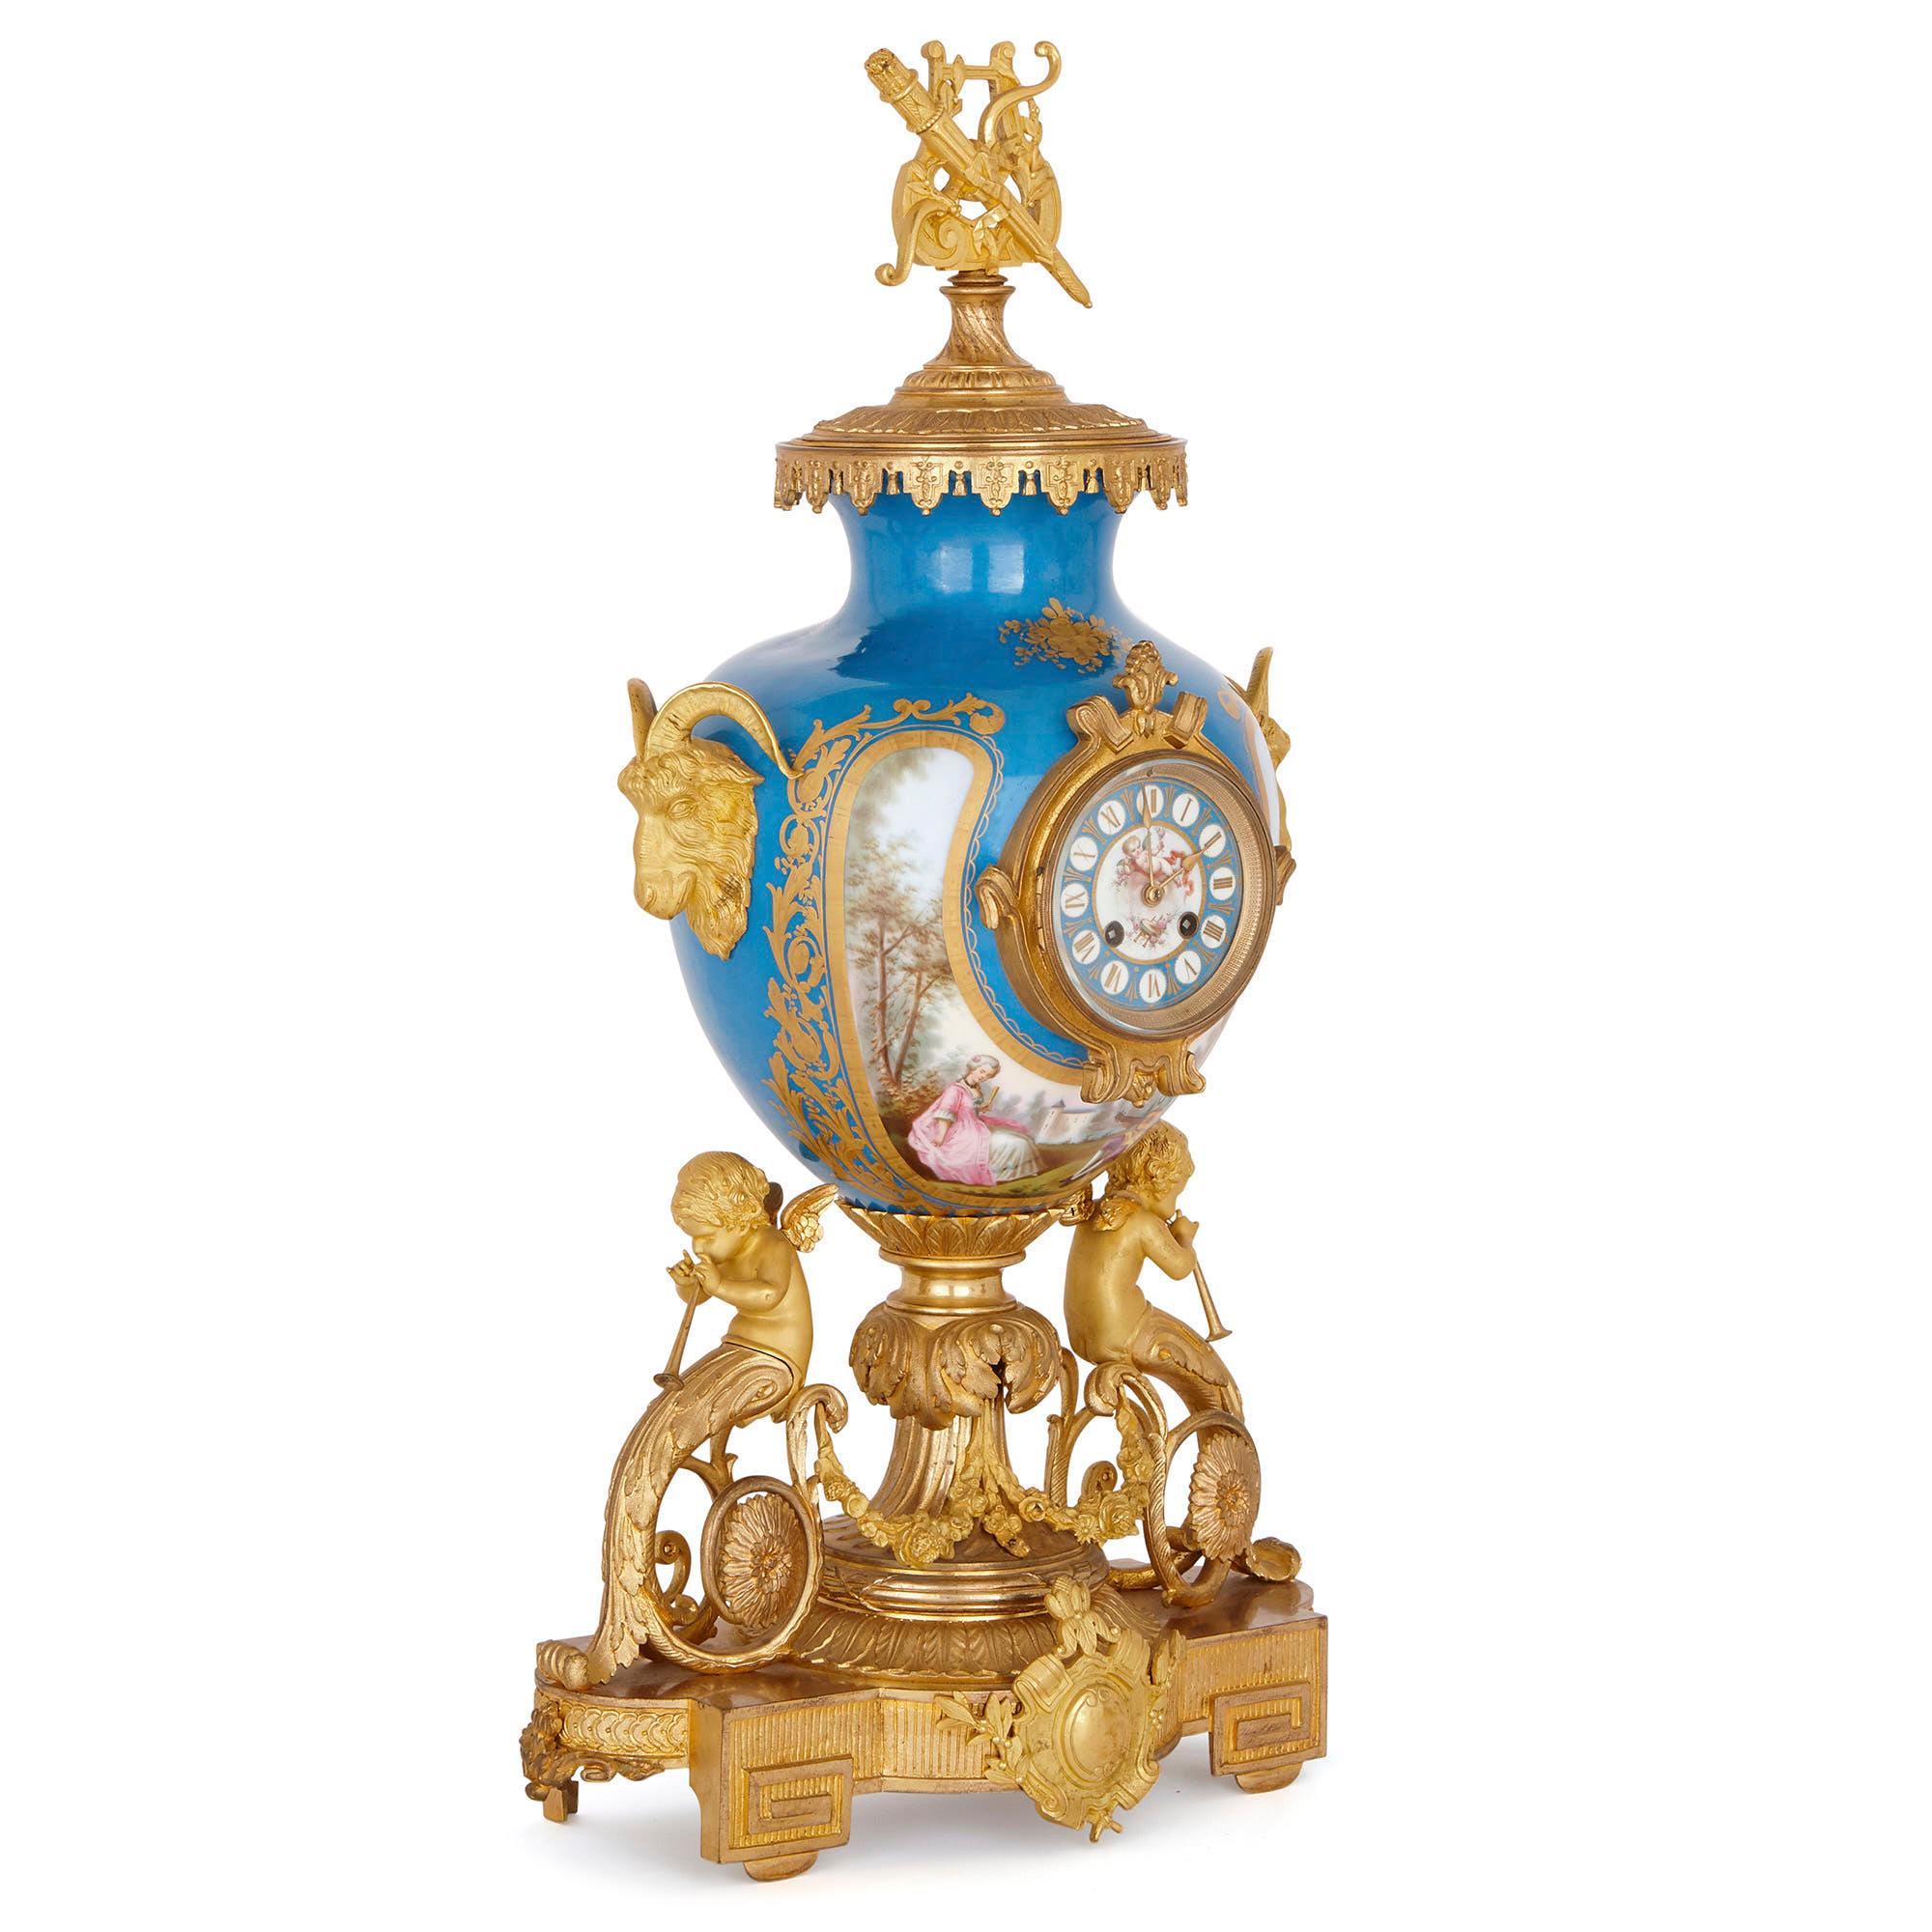 This large clock set, which is comprised of a mantel clock and pair of flanking candelabra, is designed in the style of Sèvres Porcelain manufactory goods. In the manner of Sèvres Porcelain, this set is decorated with delightful 18th century Rococo